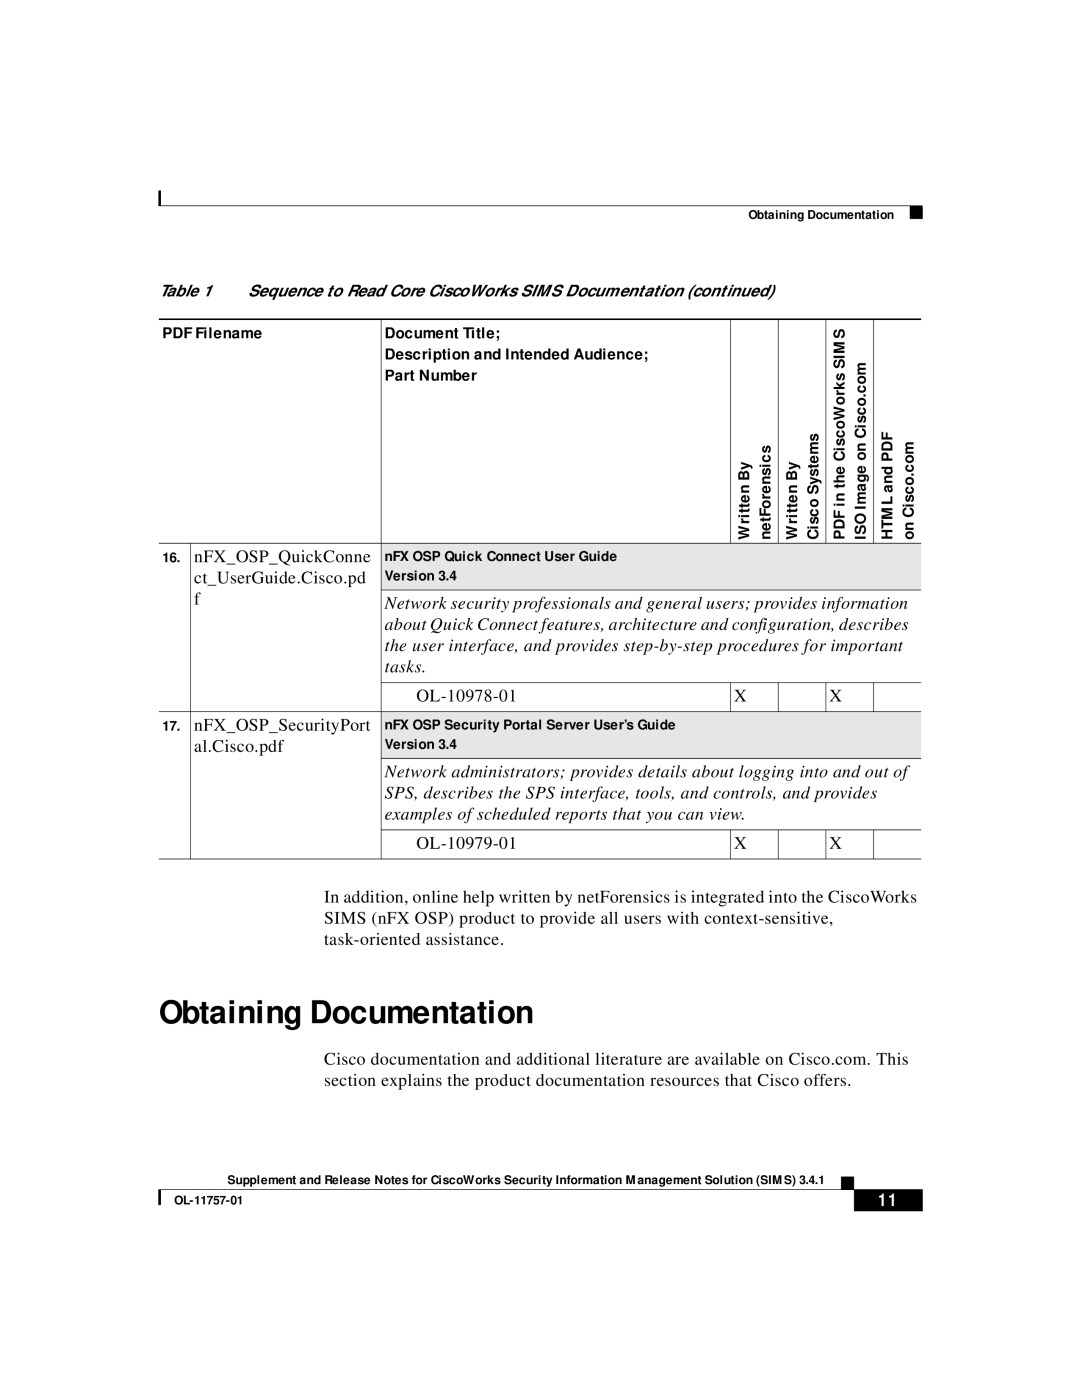 Cisco Systems OL-11757-01 manual Obtaining Documentation, Document Title, Description and Intended Audience, Part Number 